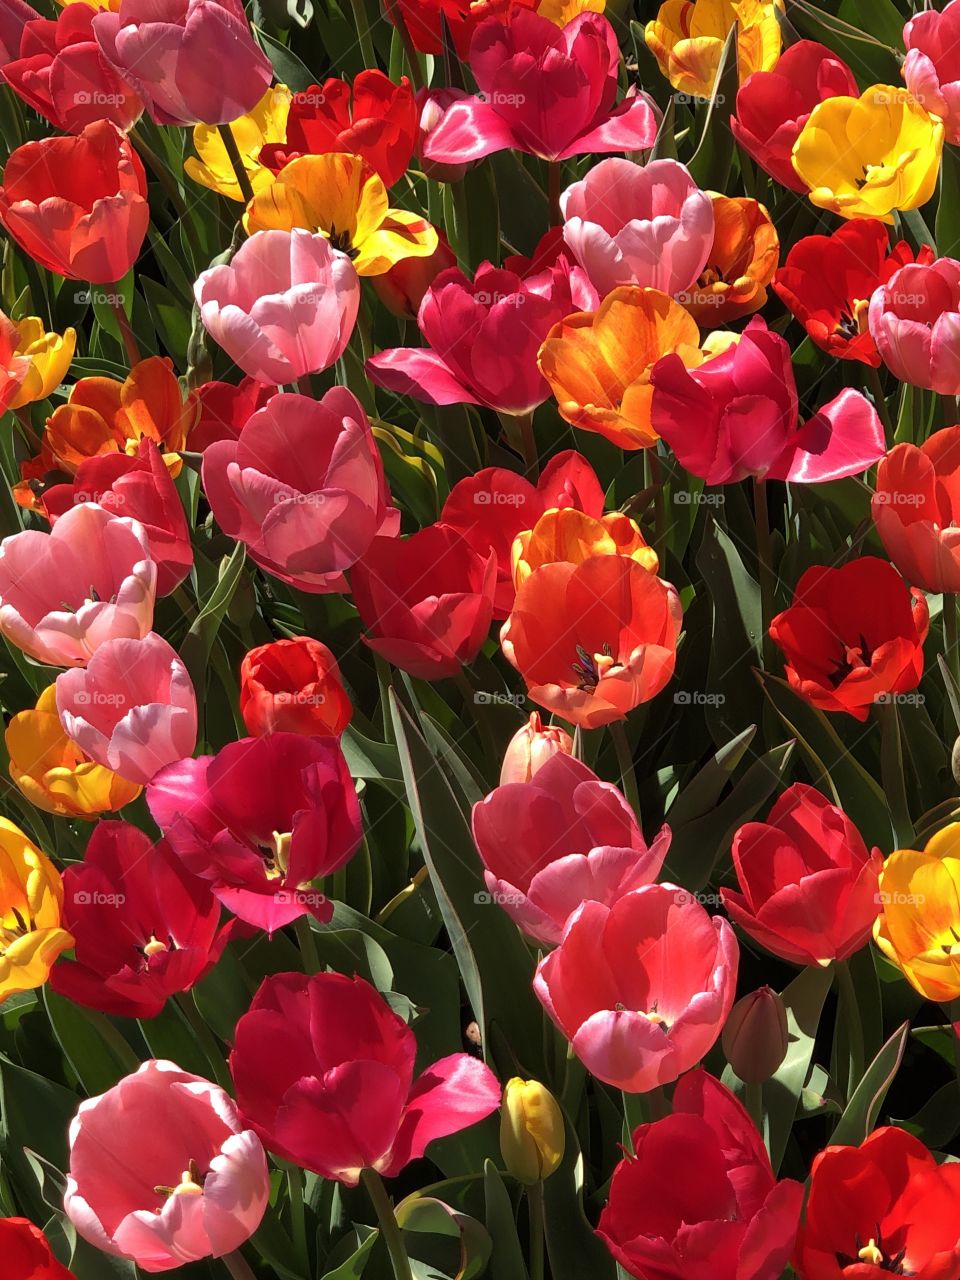 Bed of Colorful Tulips Blooming in a Formal Garden. Masses of Red, Orange, Pink, and Yellow Spring Tulips in Full Bloom.